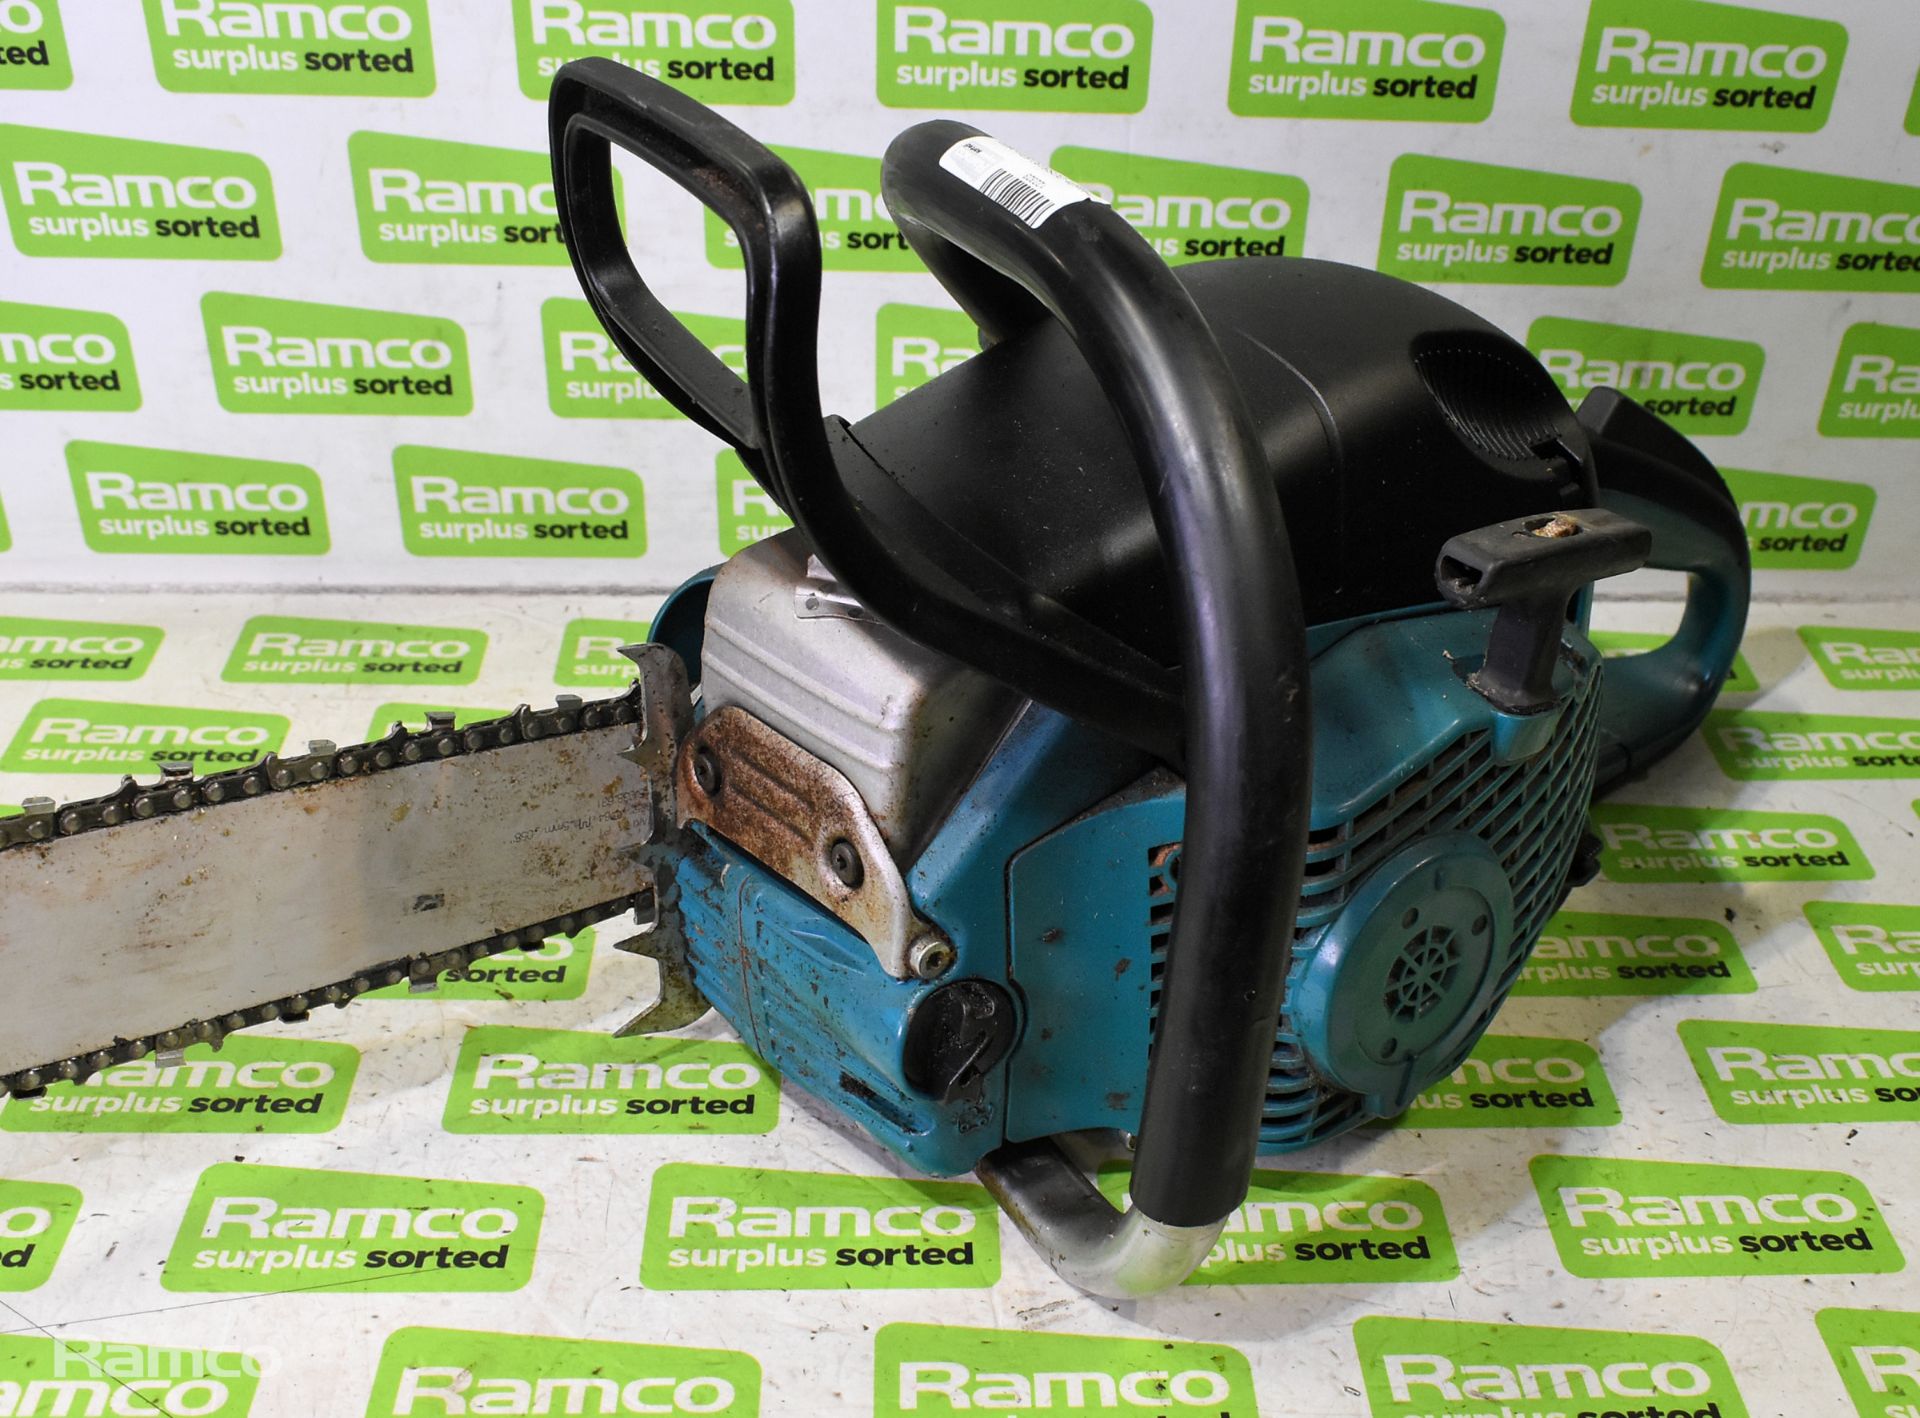 Makita DCS5030 50cc petrol chainsaw with guide and chain - AS SPARES & REPAIRS - Image 3 of 7